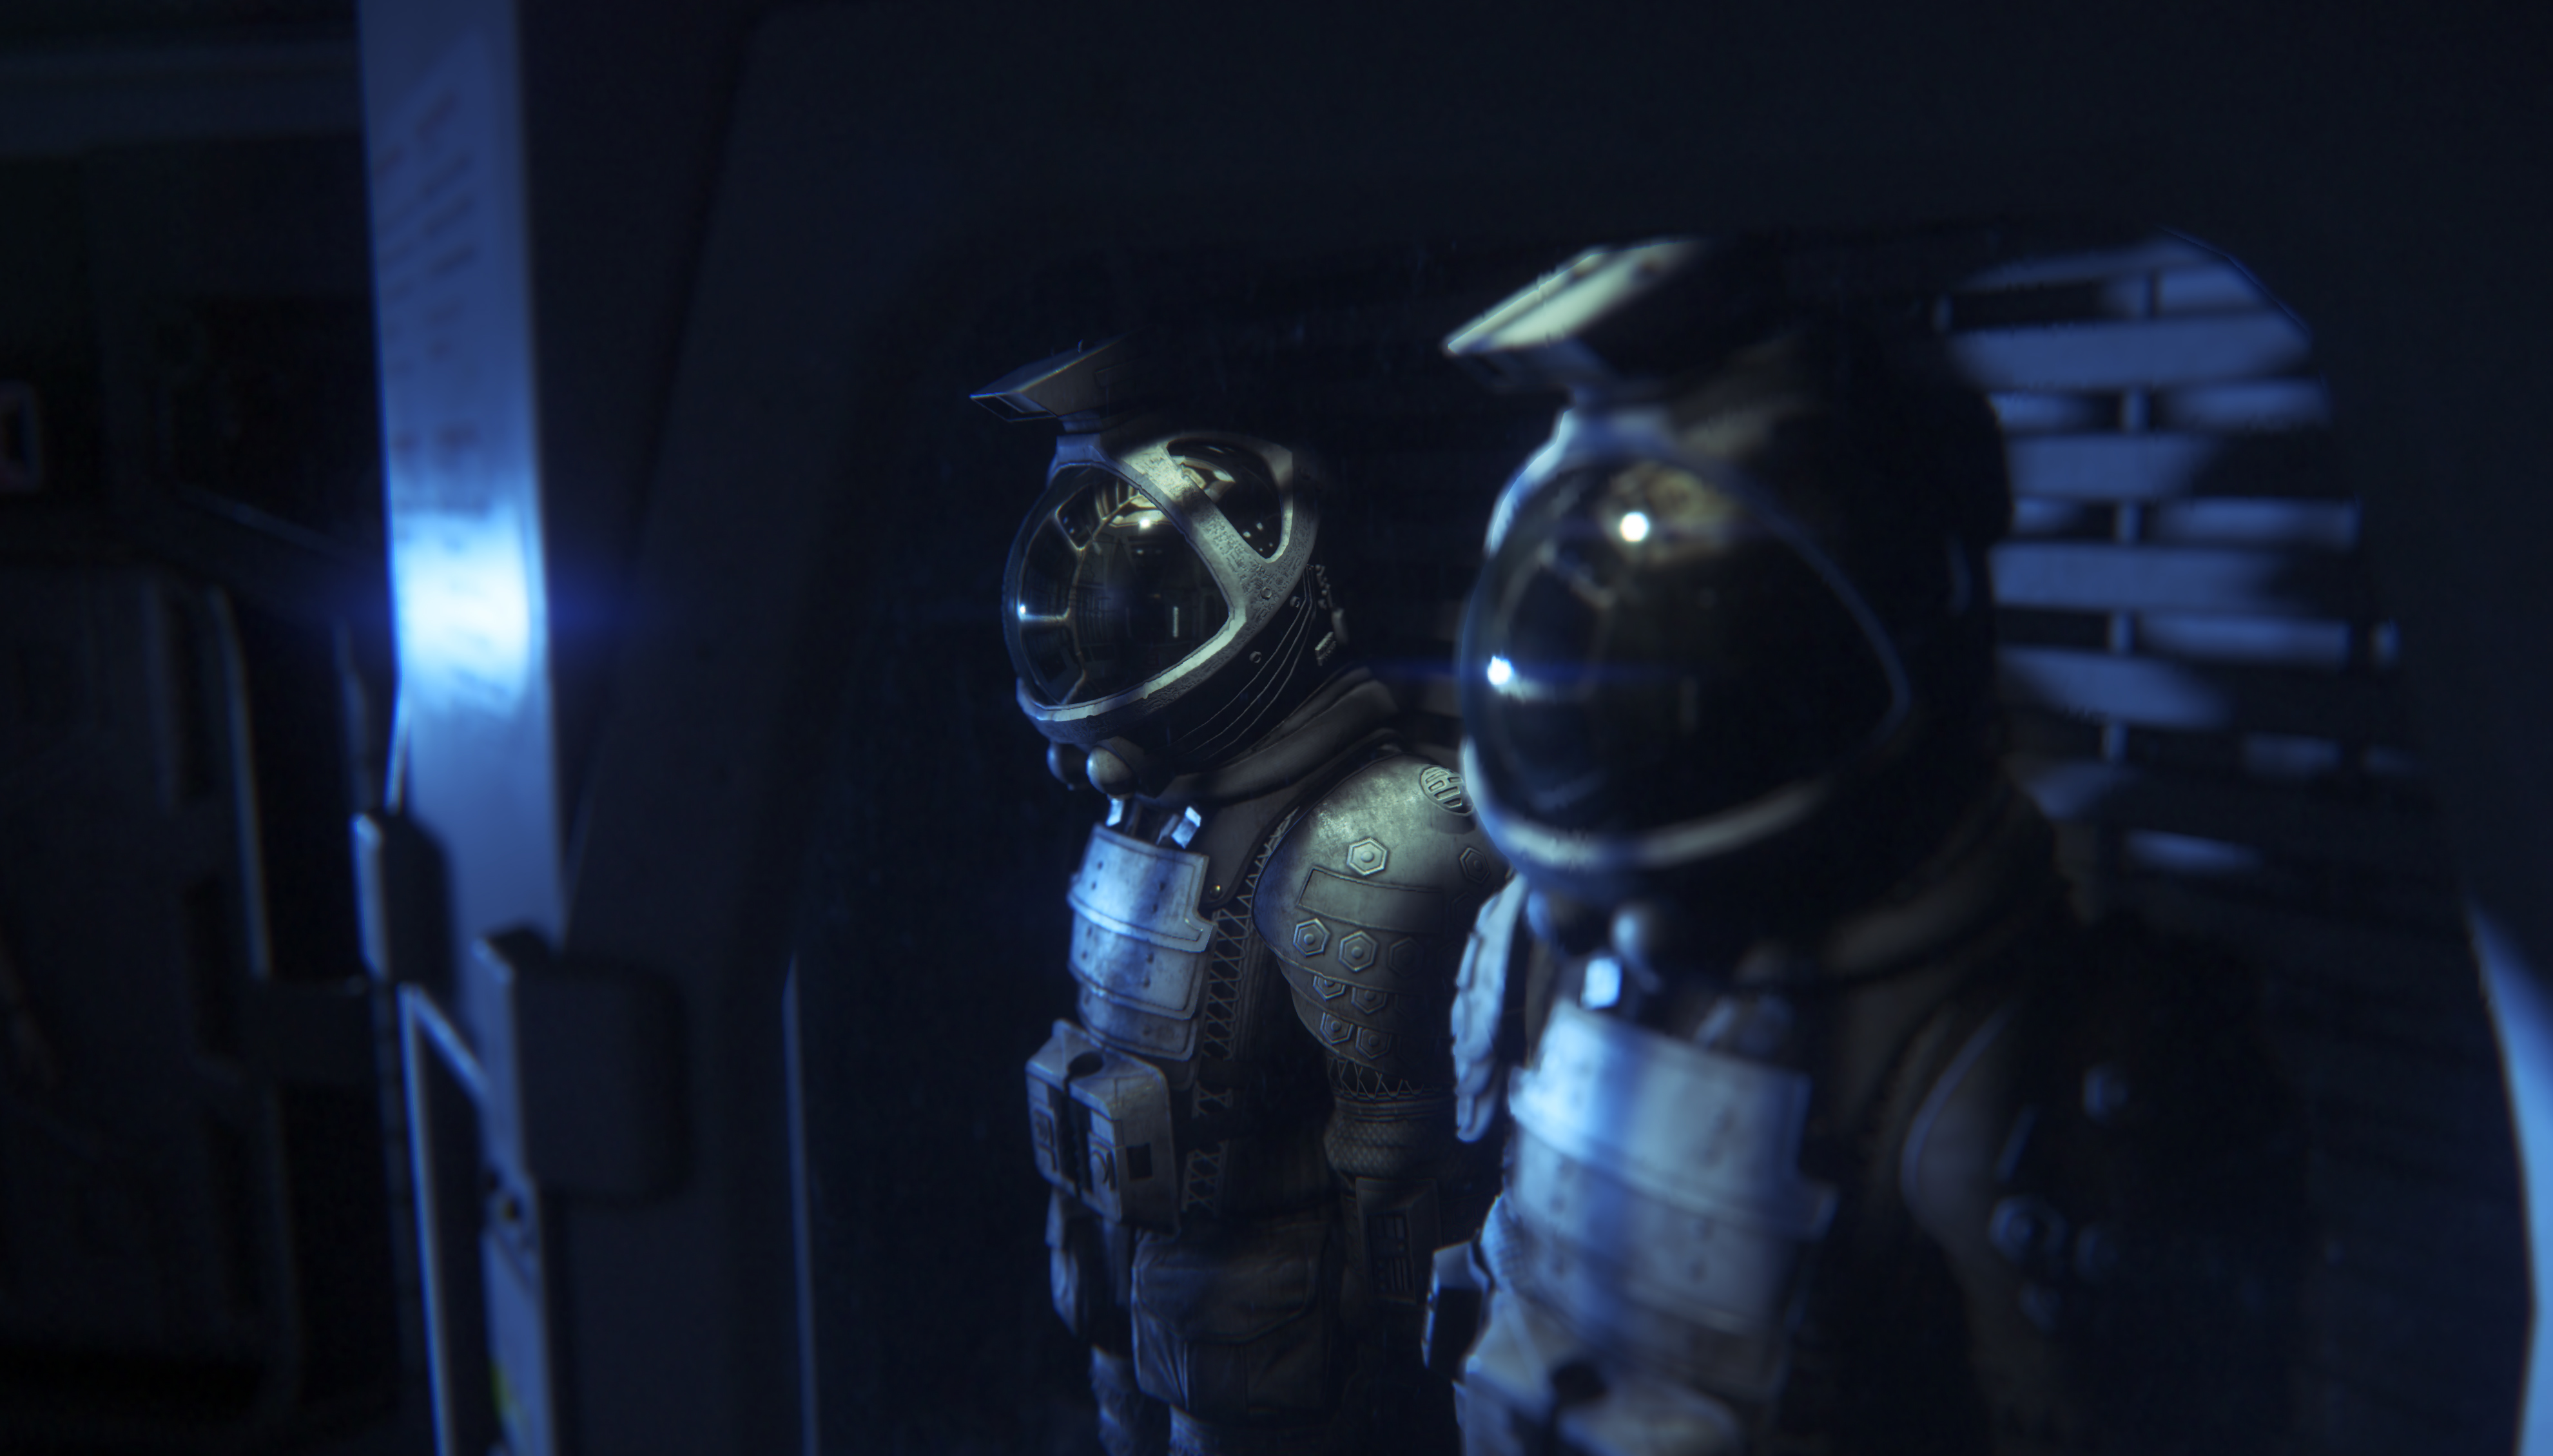 Alien Isolation Media, Trailers, Gameplay Footage - AvPGalaxy